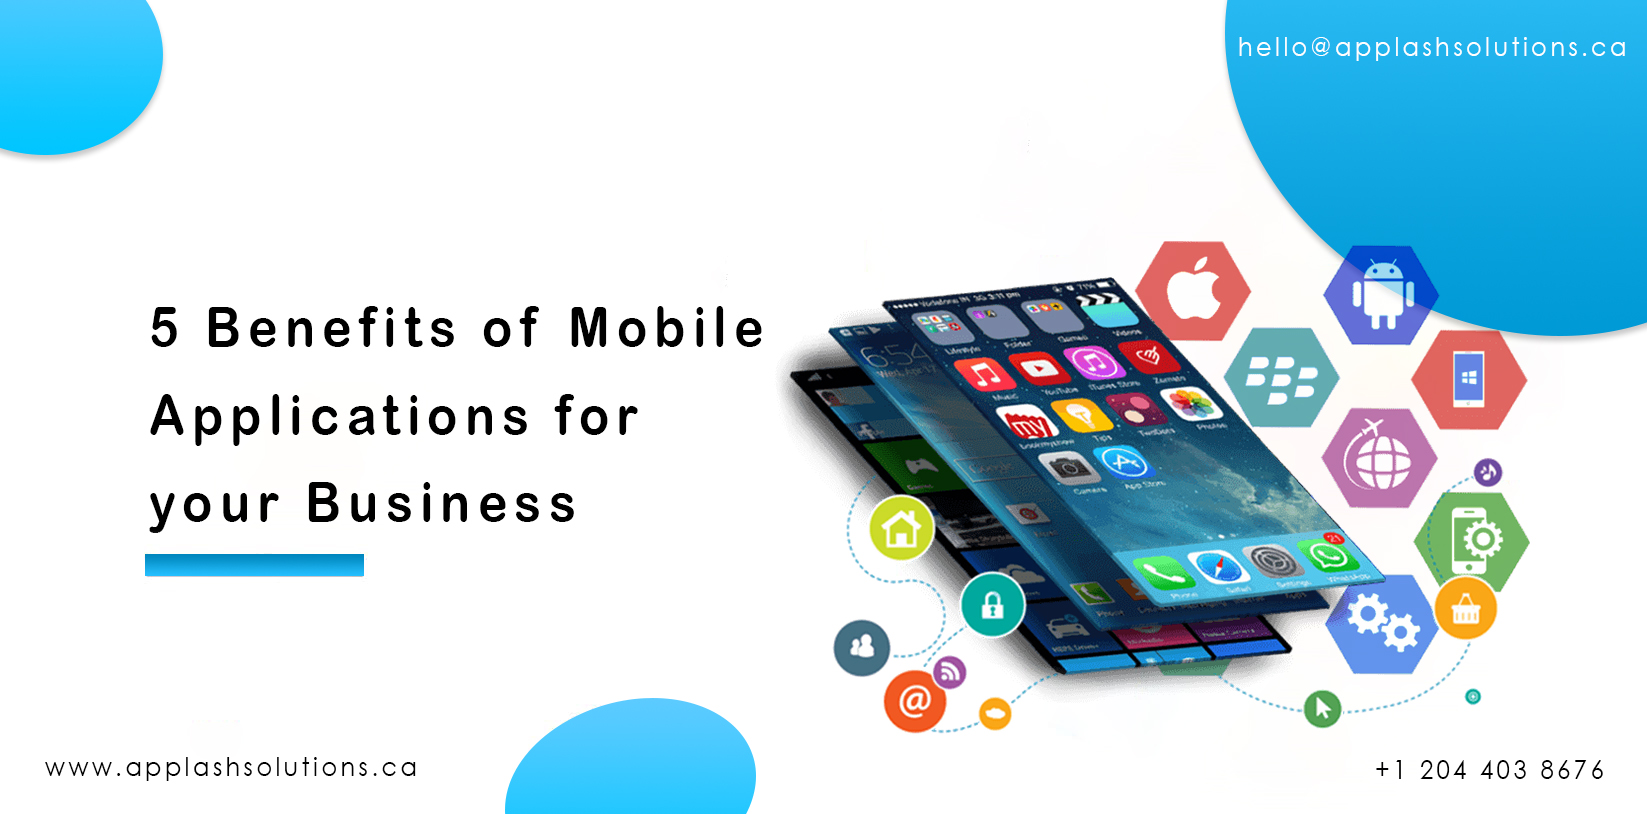 5 Benefits of Mobile Applications for your Business